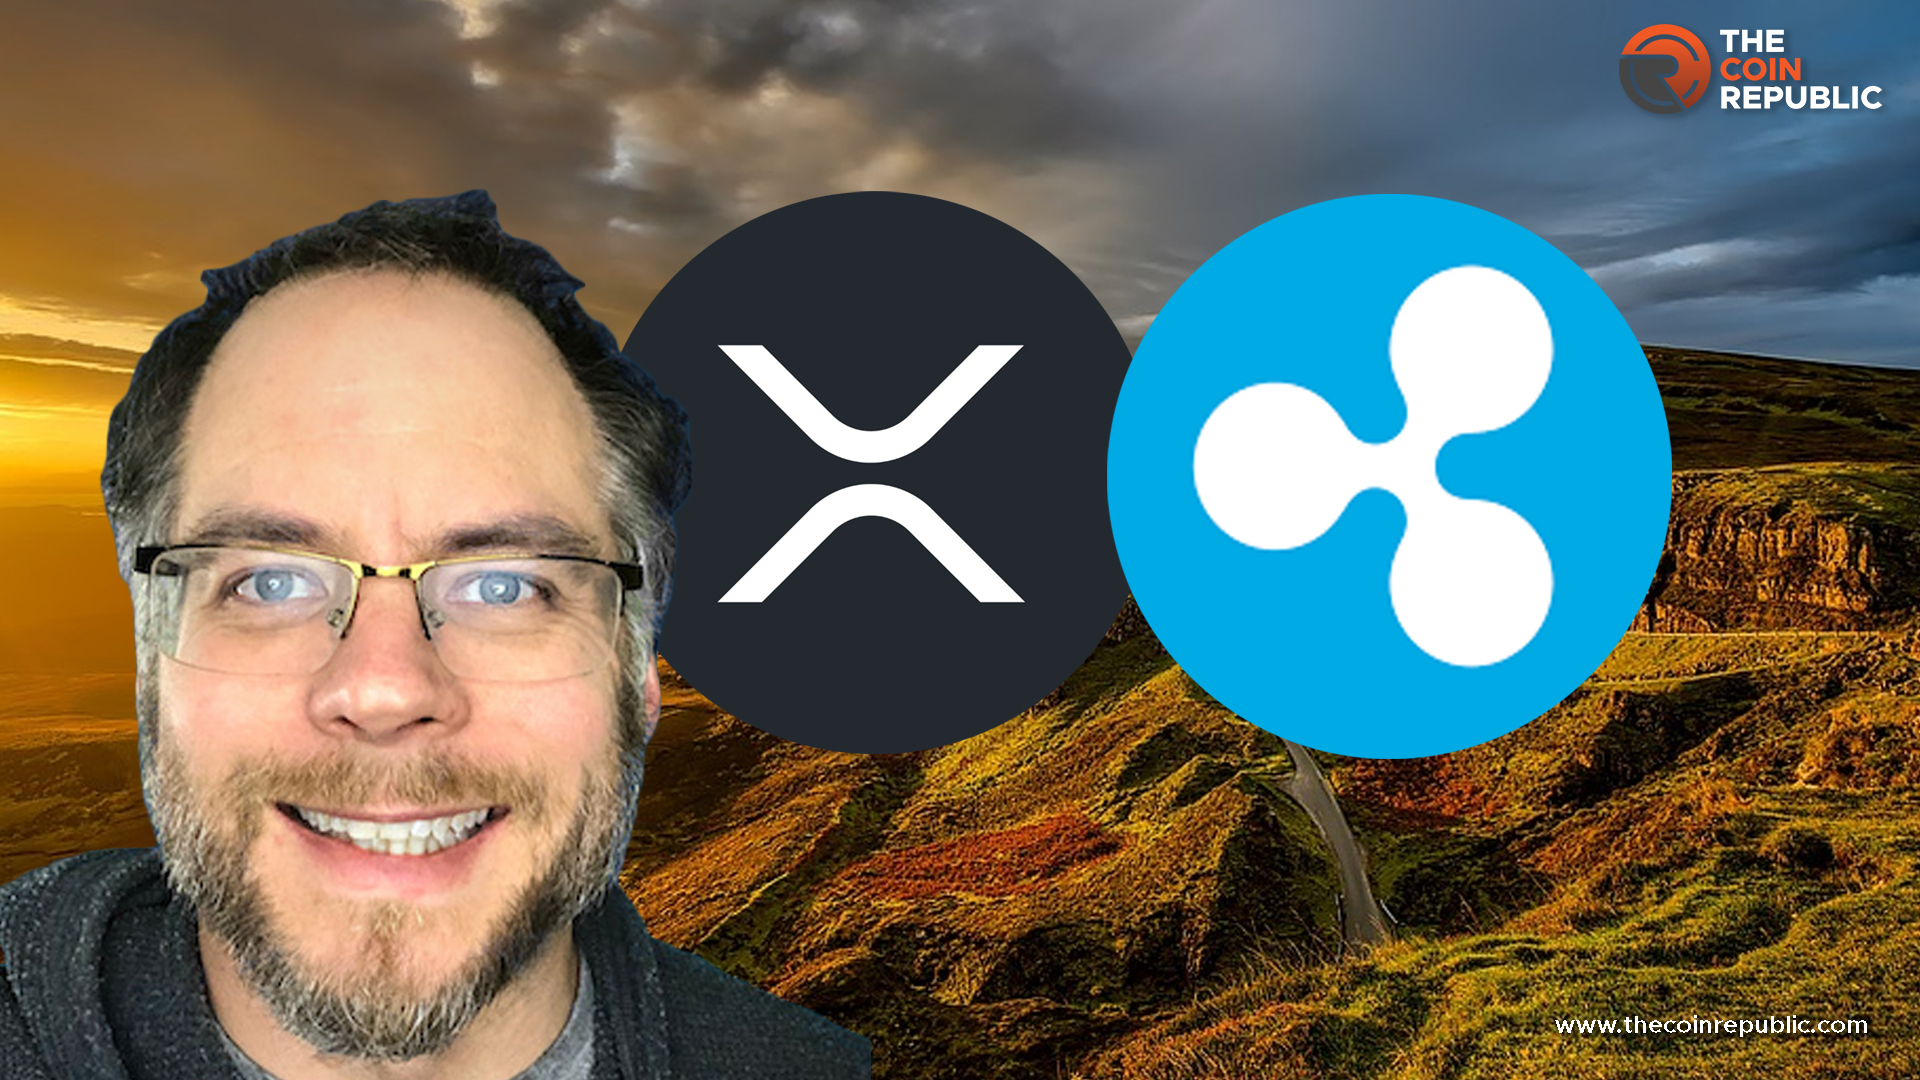 XRP Ledger Smart Contracts Are In Development-Ripple’s Former Director